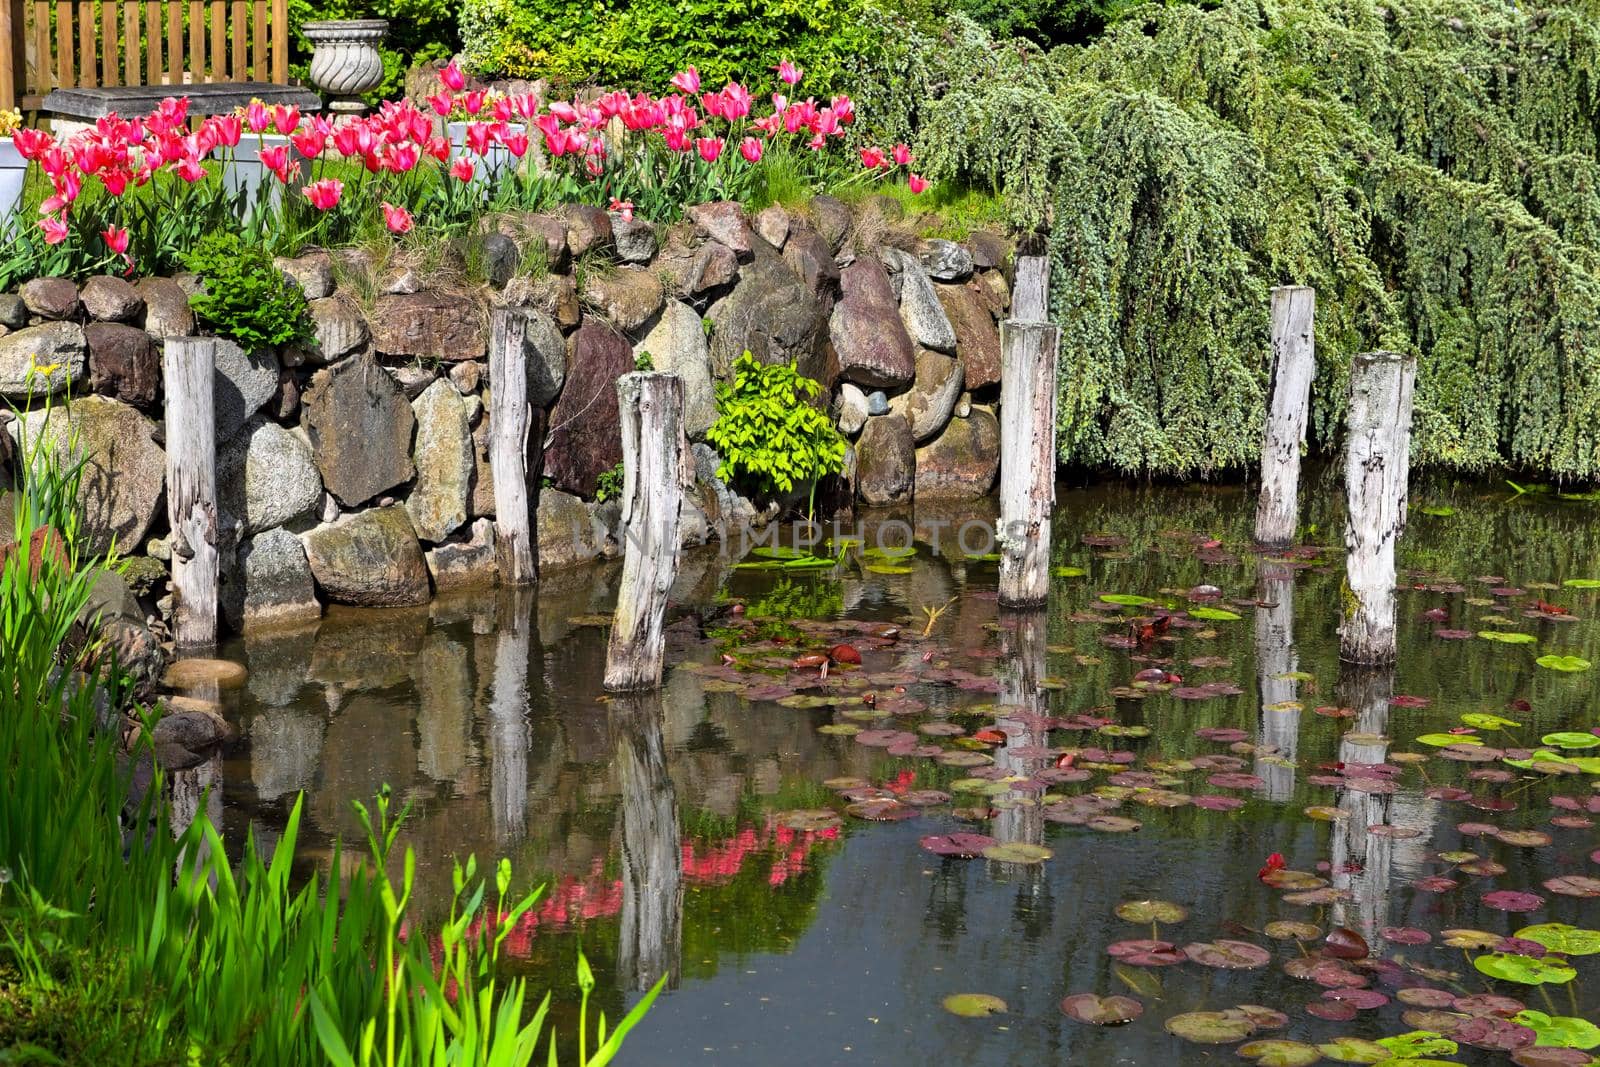 Small garden pond with stone shores and many flowers and decorative vegetation